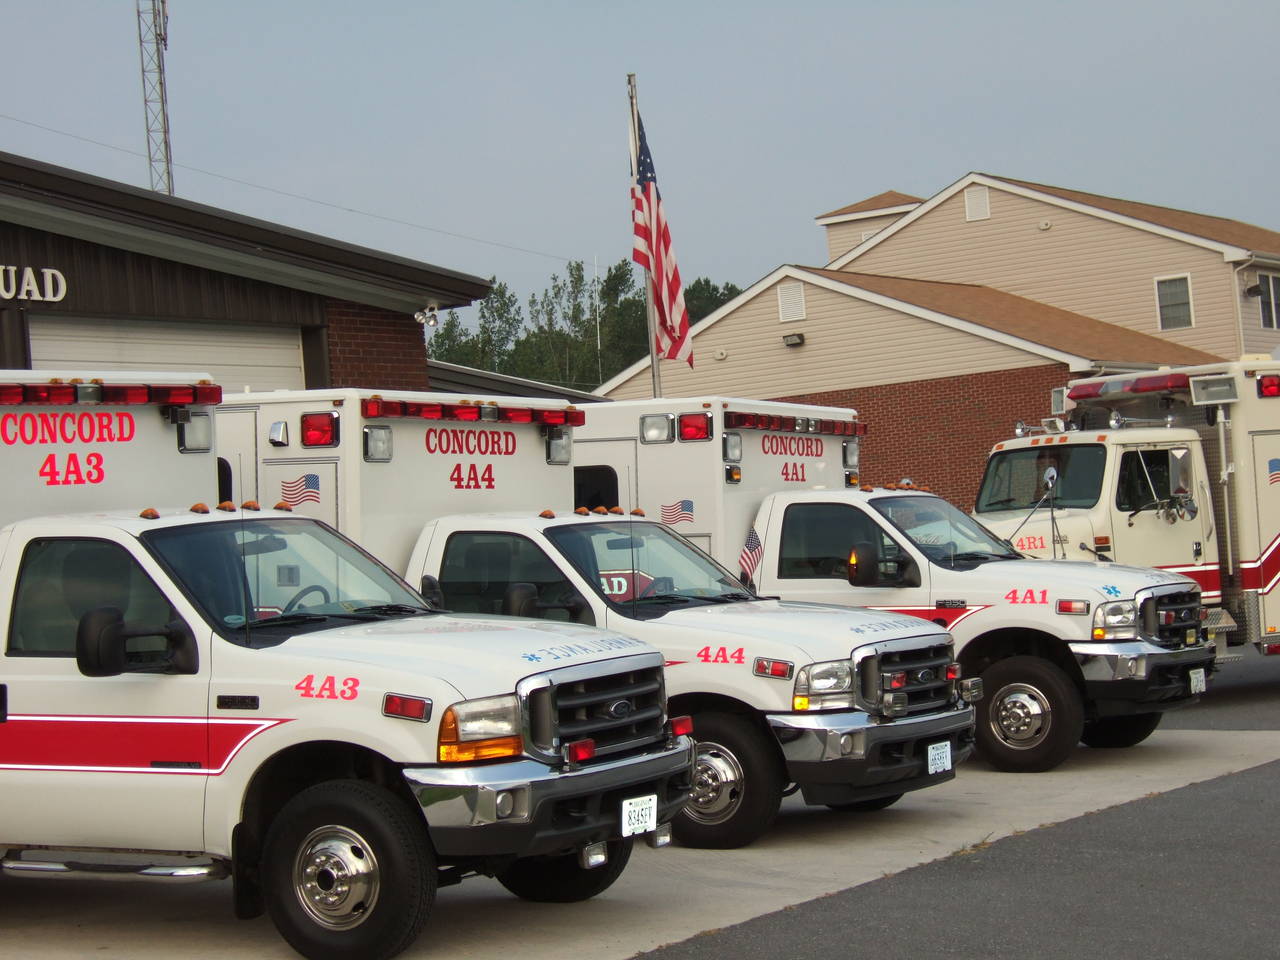 Other units in our fleet + One International Crash/Rescue